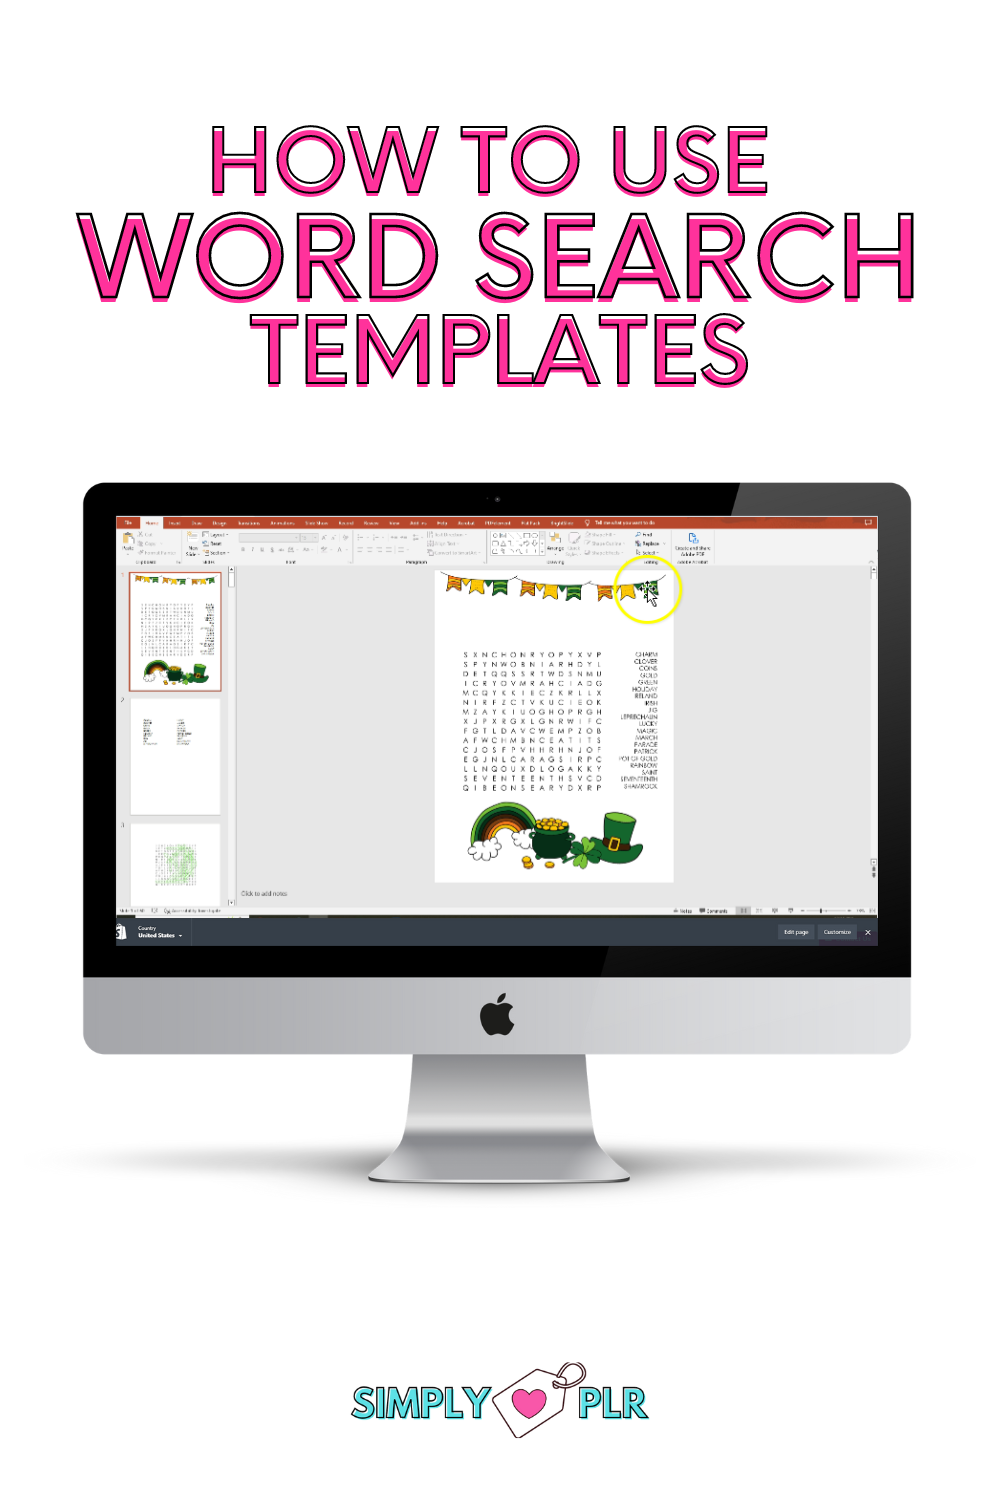 HOW TO USE WORD SEARCH TEMPLATES